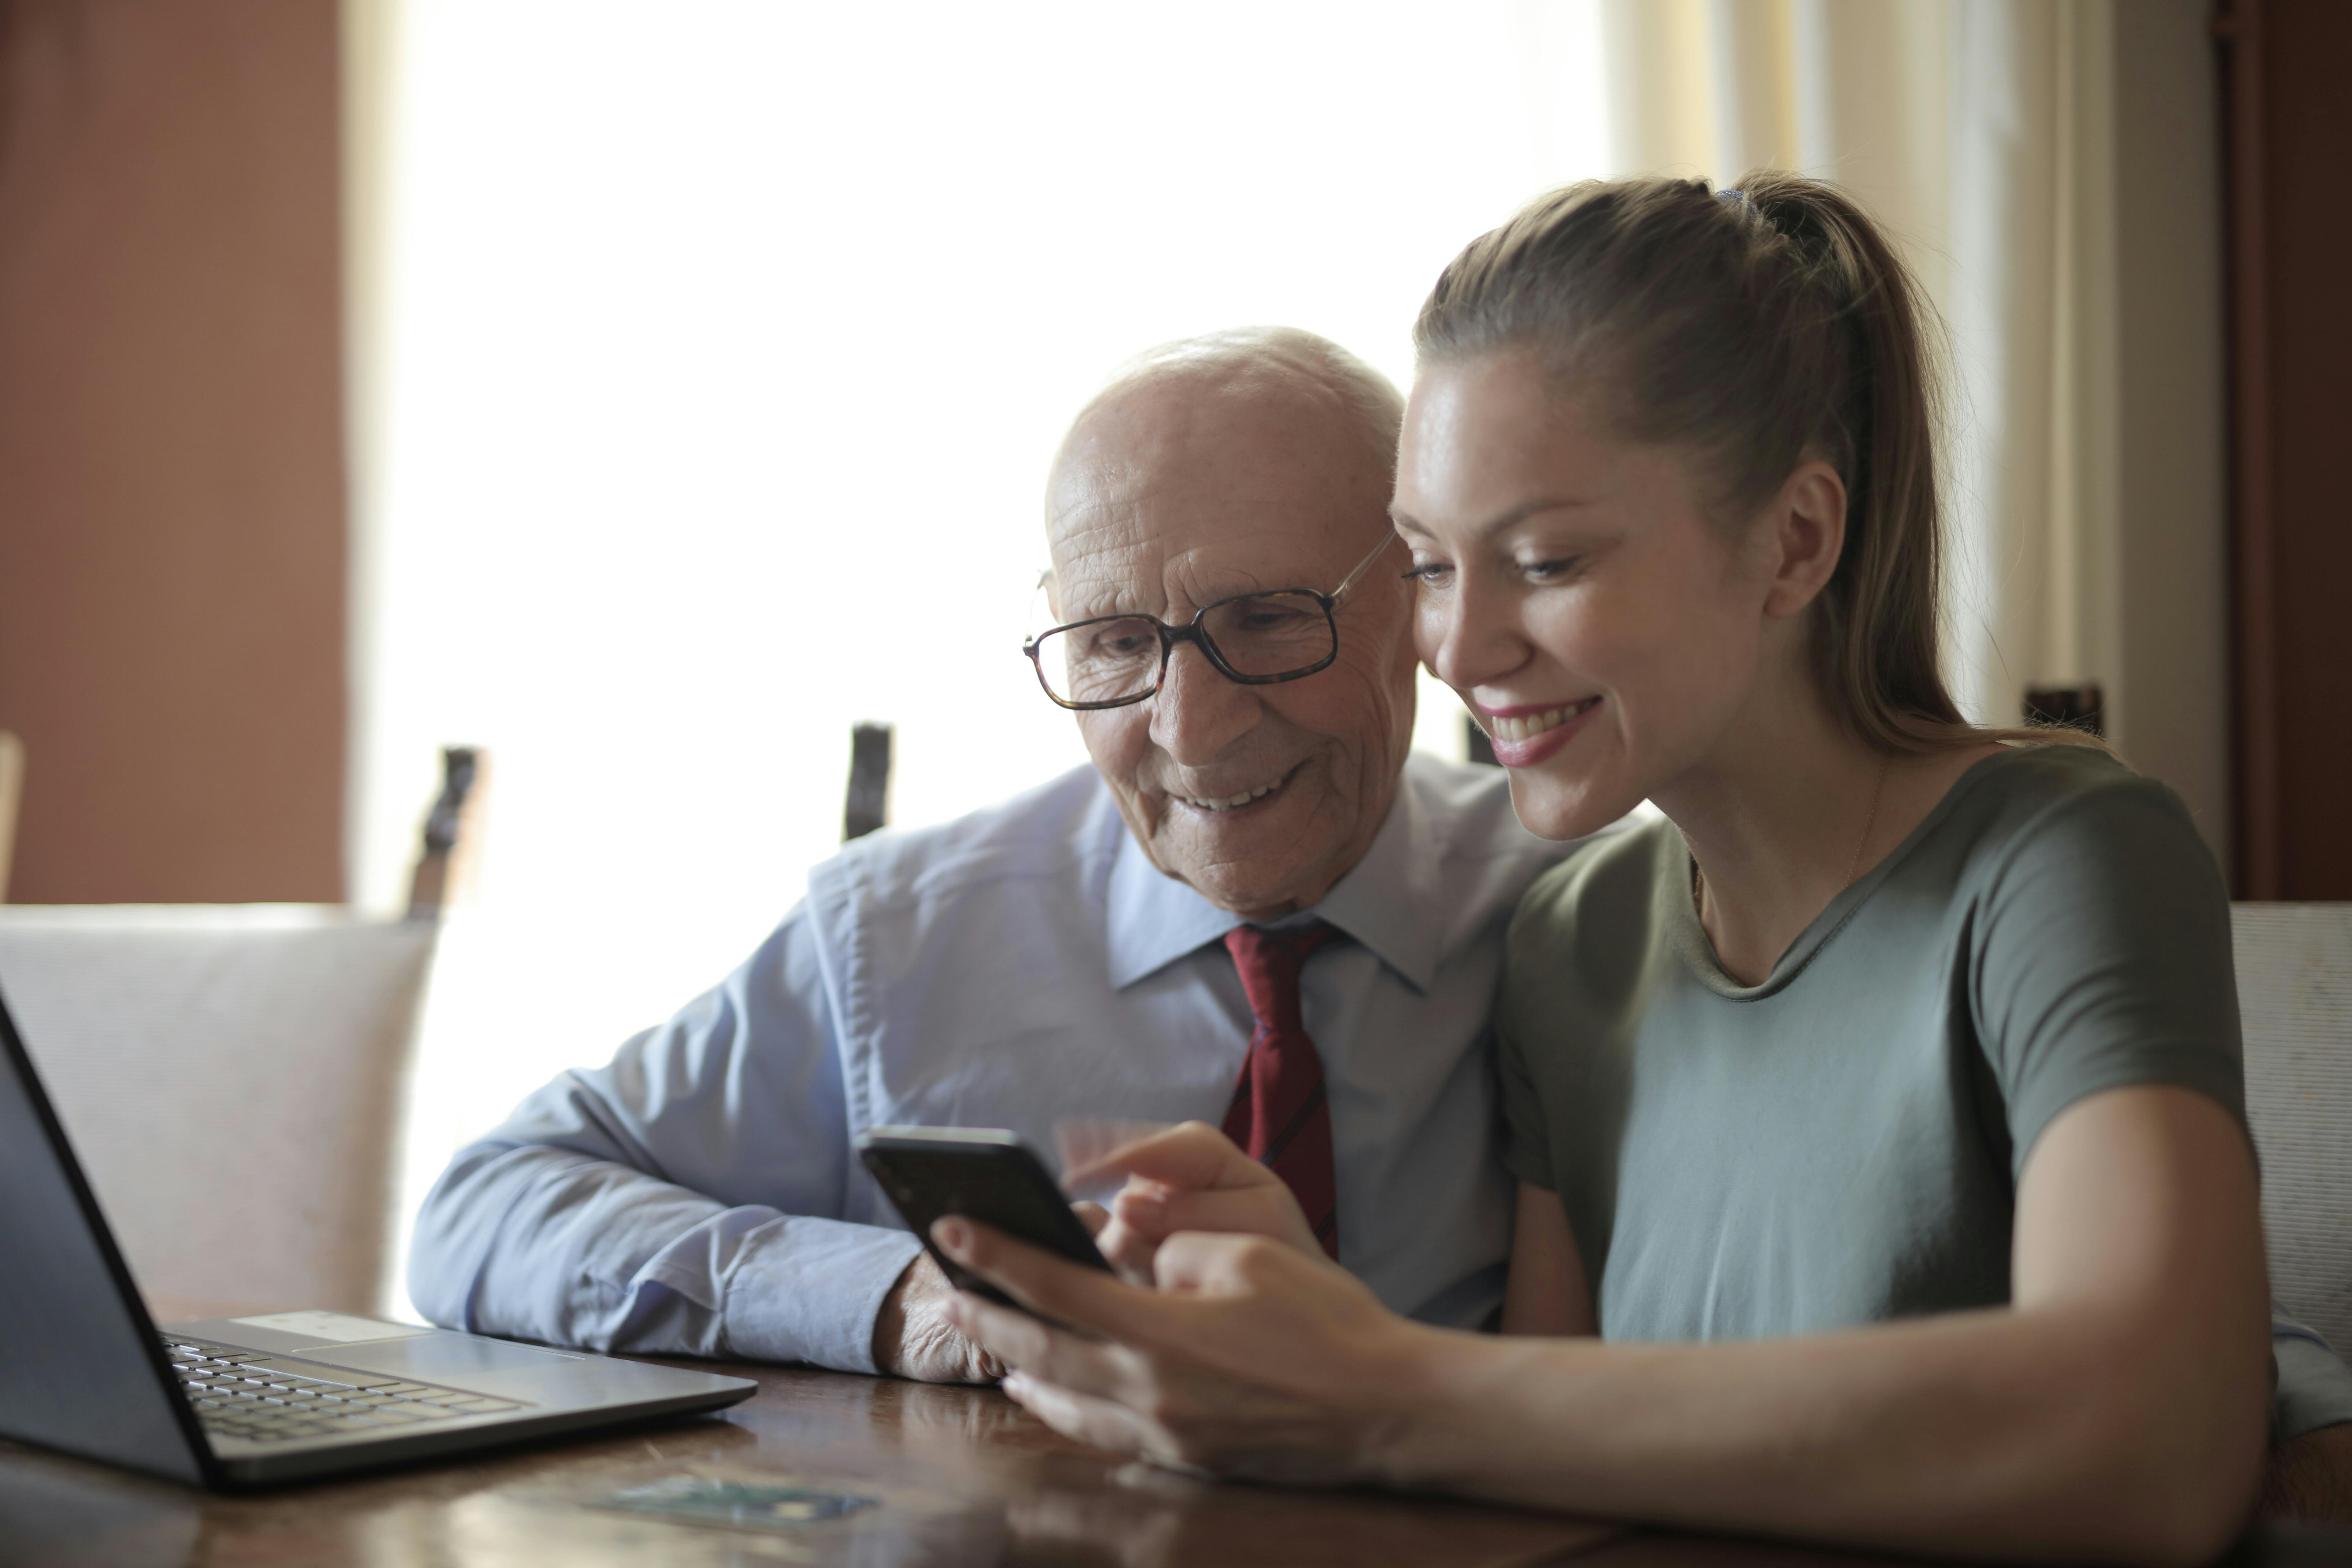 Older man and younger woman smiling and sitting at a table, looking at a mobile phone with a laptop open on the table